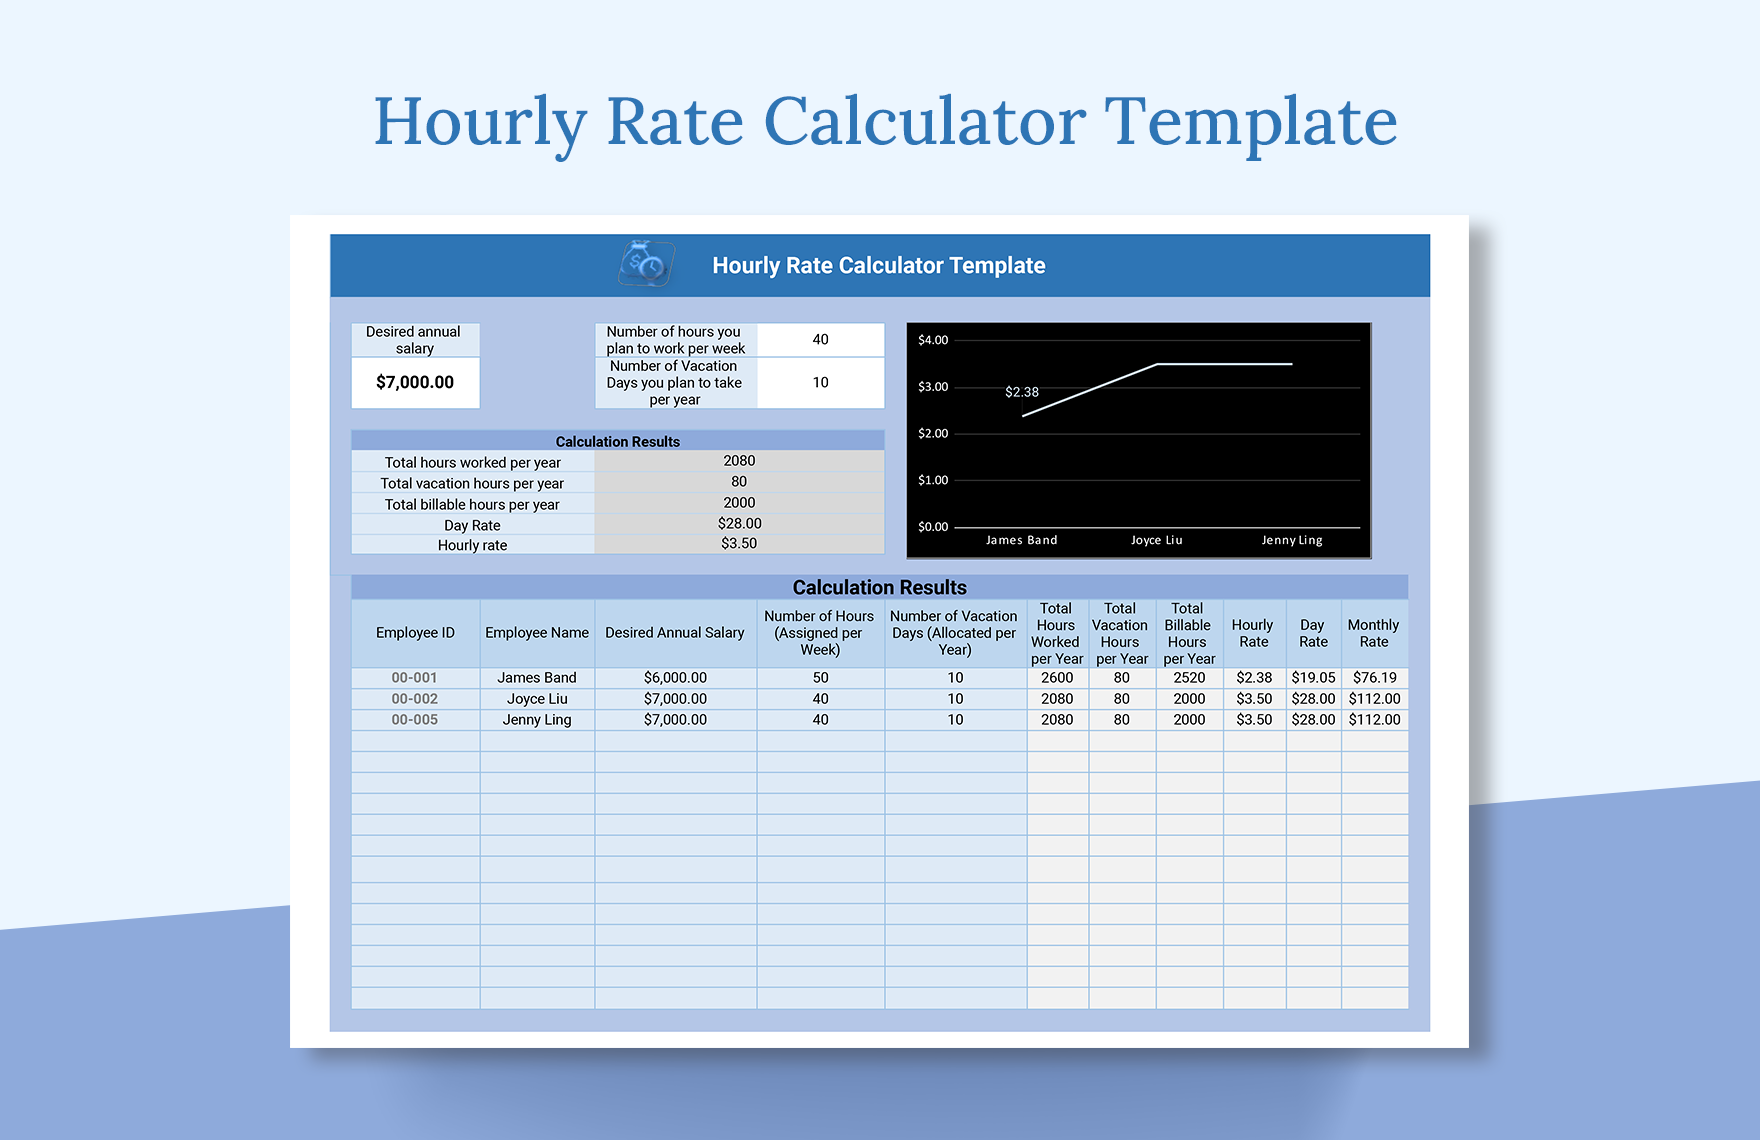 Hourly Rate Calculator Template